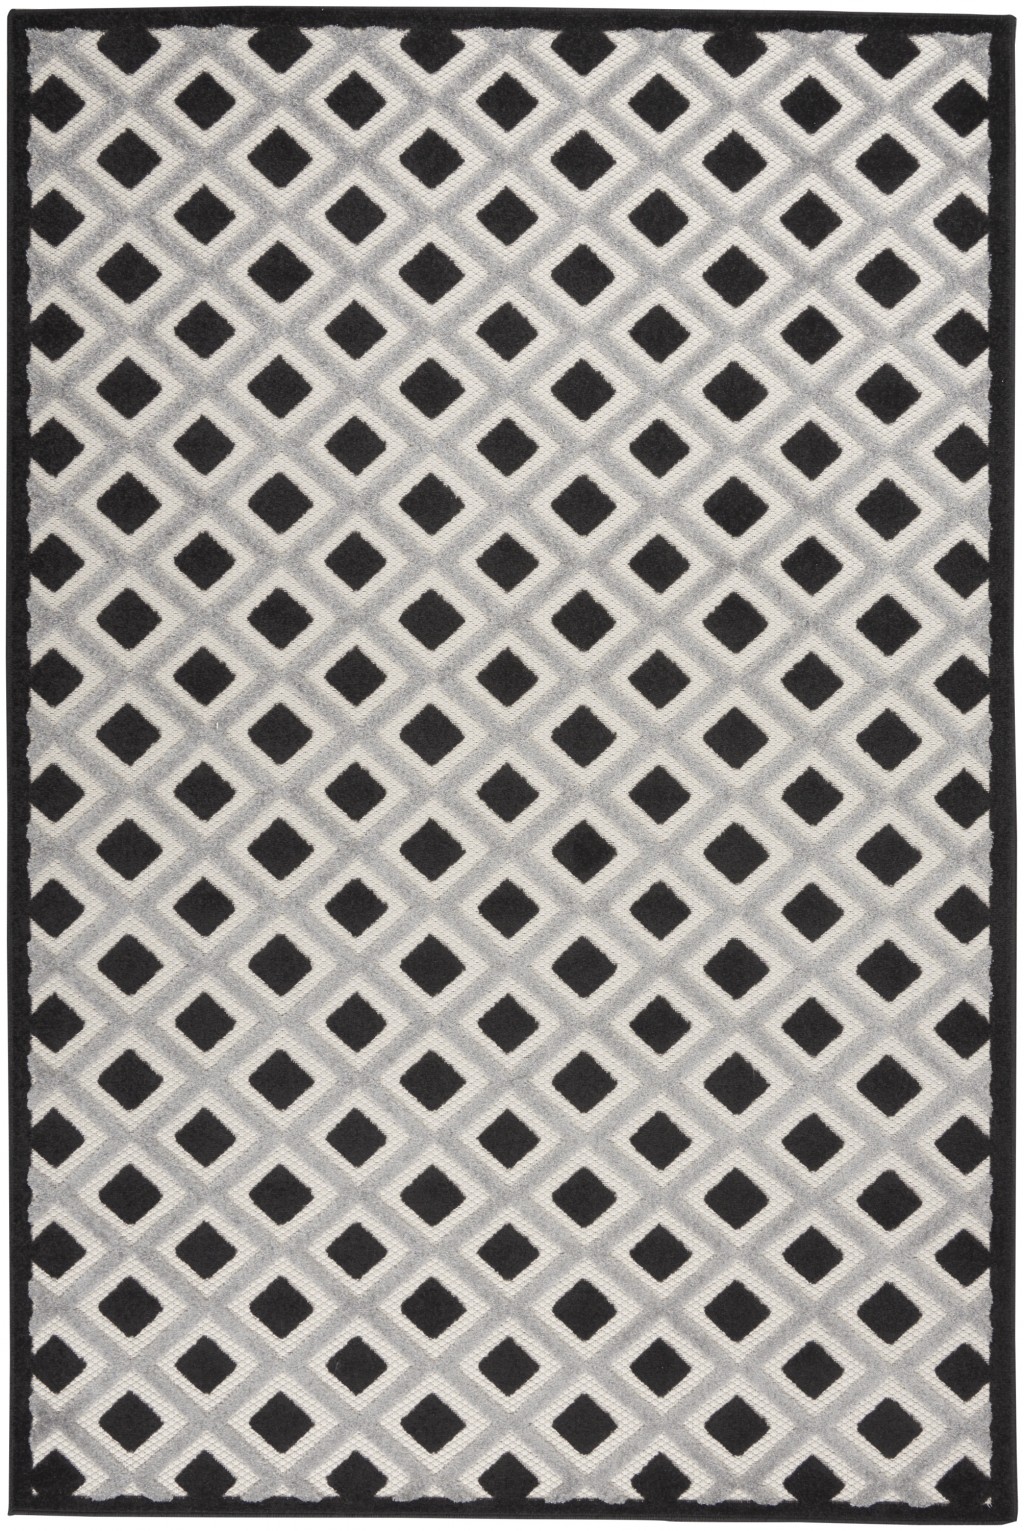 4' X 6' Black And White Geometric Indoor Outdoor Area Rug-385134-1